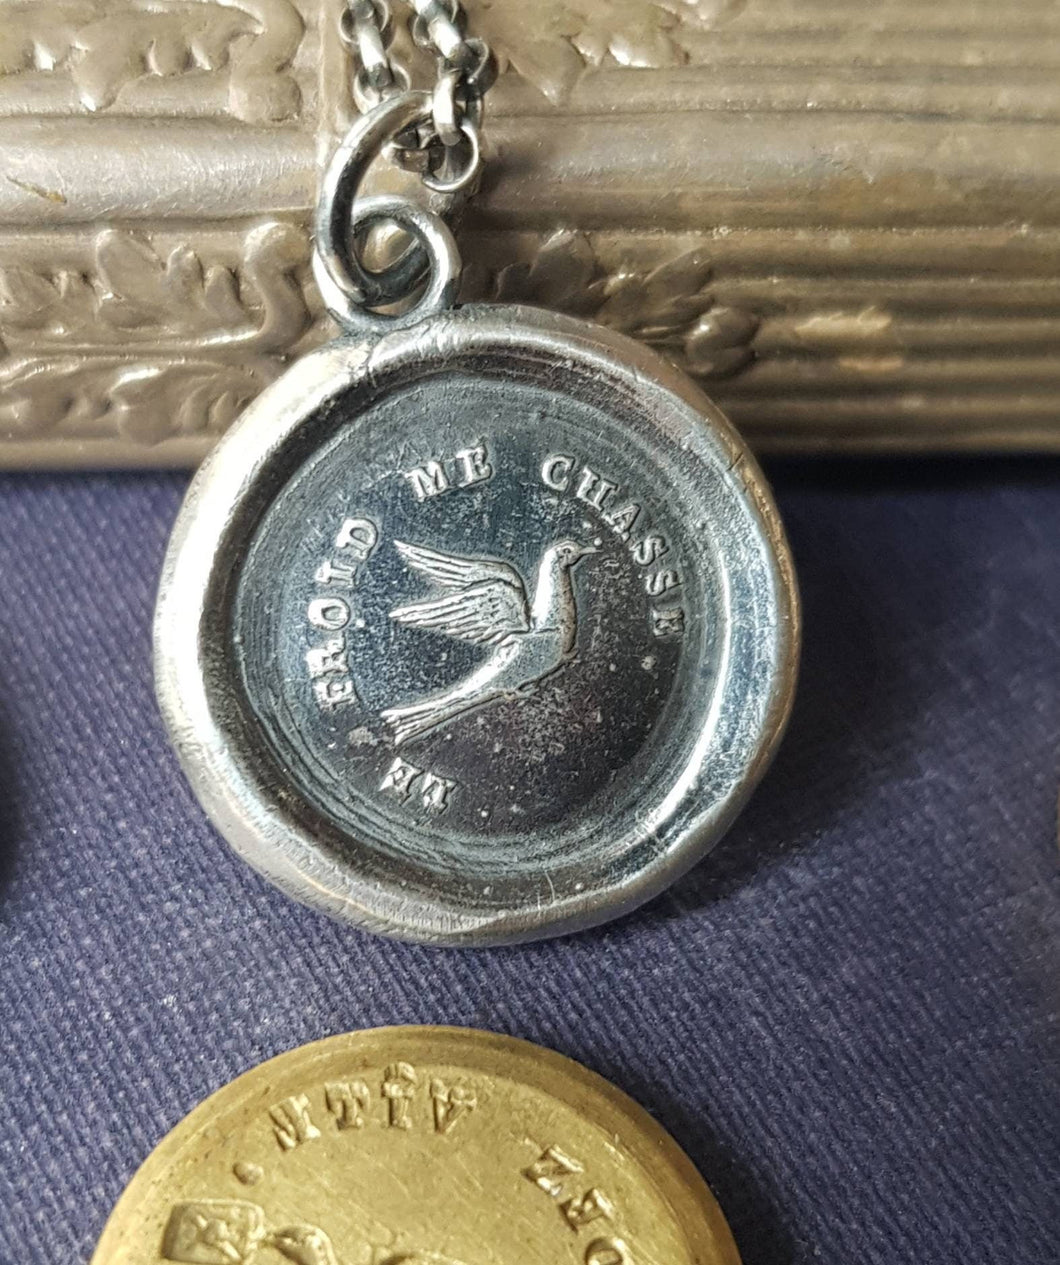 Swallow pendant - antique wax letter seal, handmade wax seal jewelry. The cold chases me away.  French motto, lovely meaningful pendant.